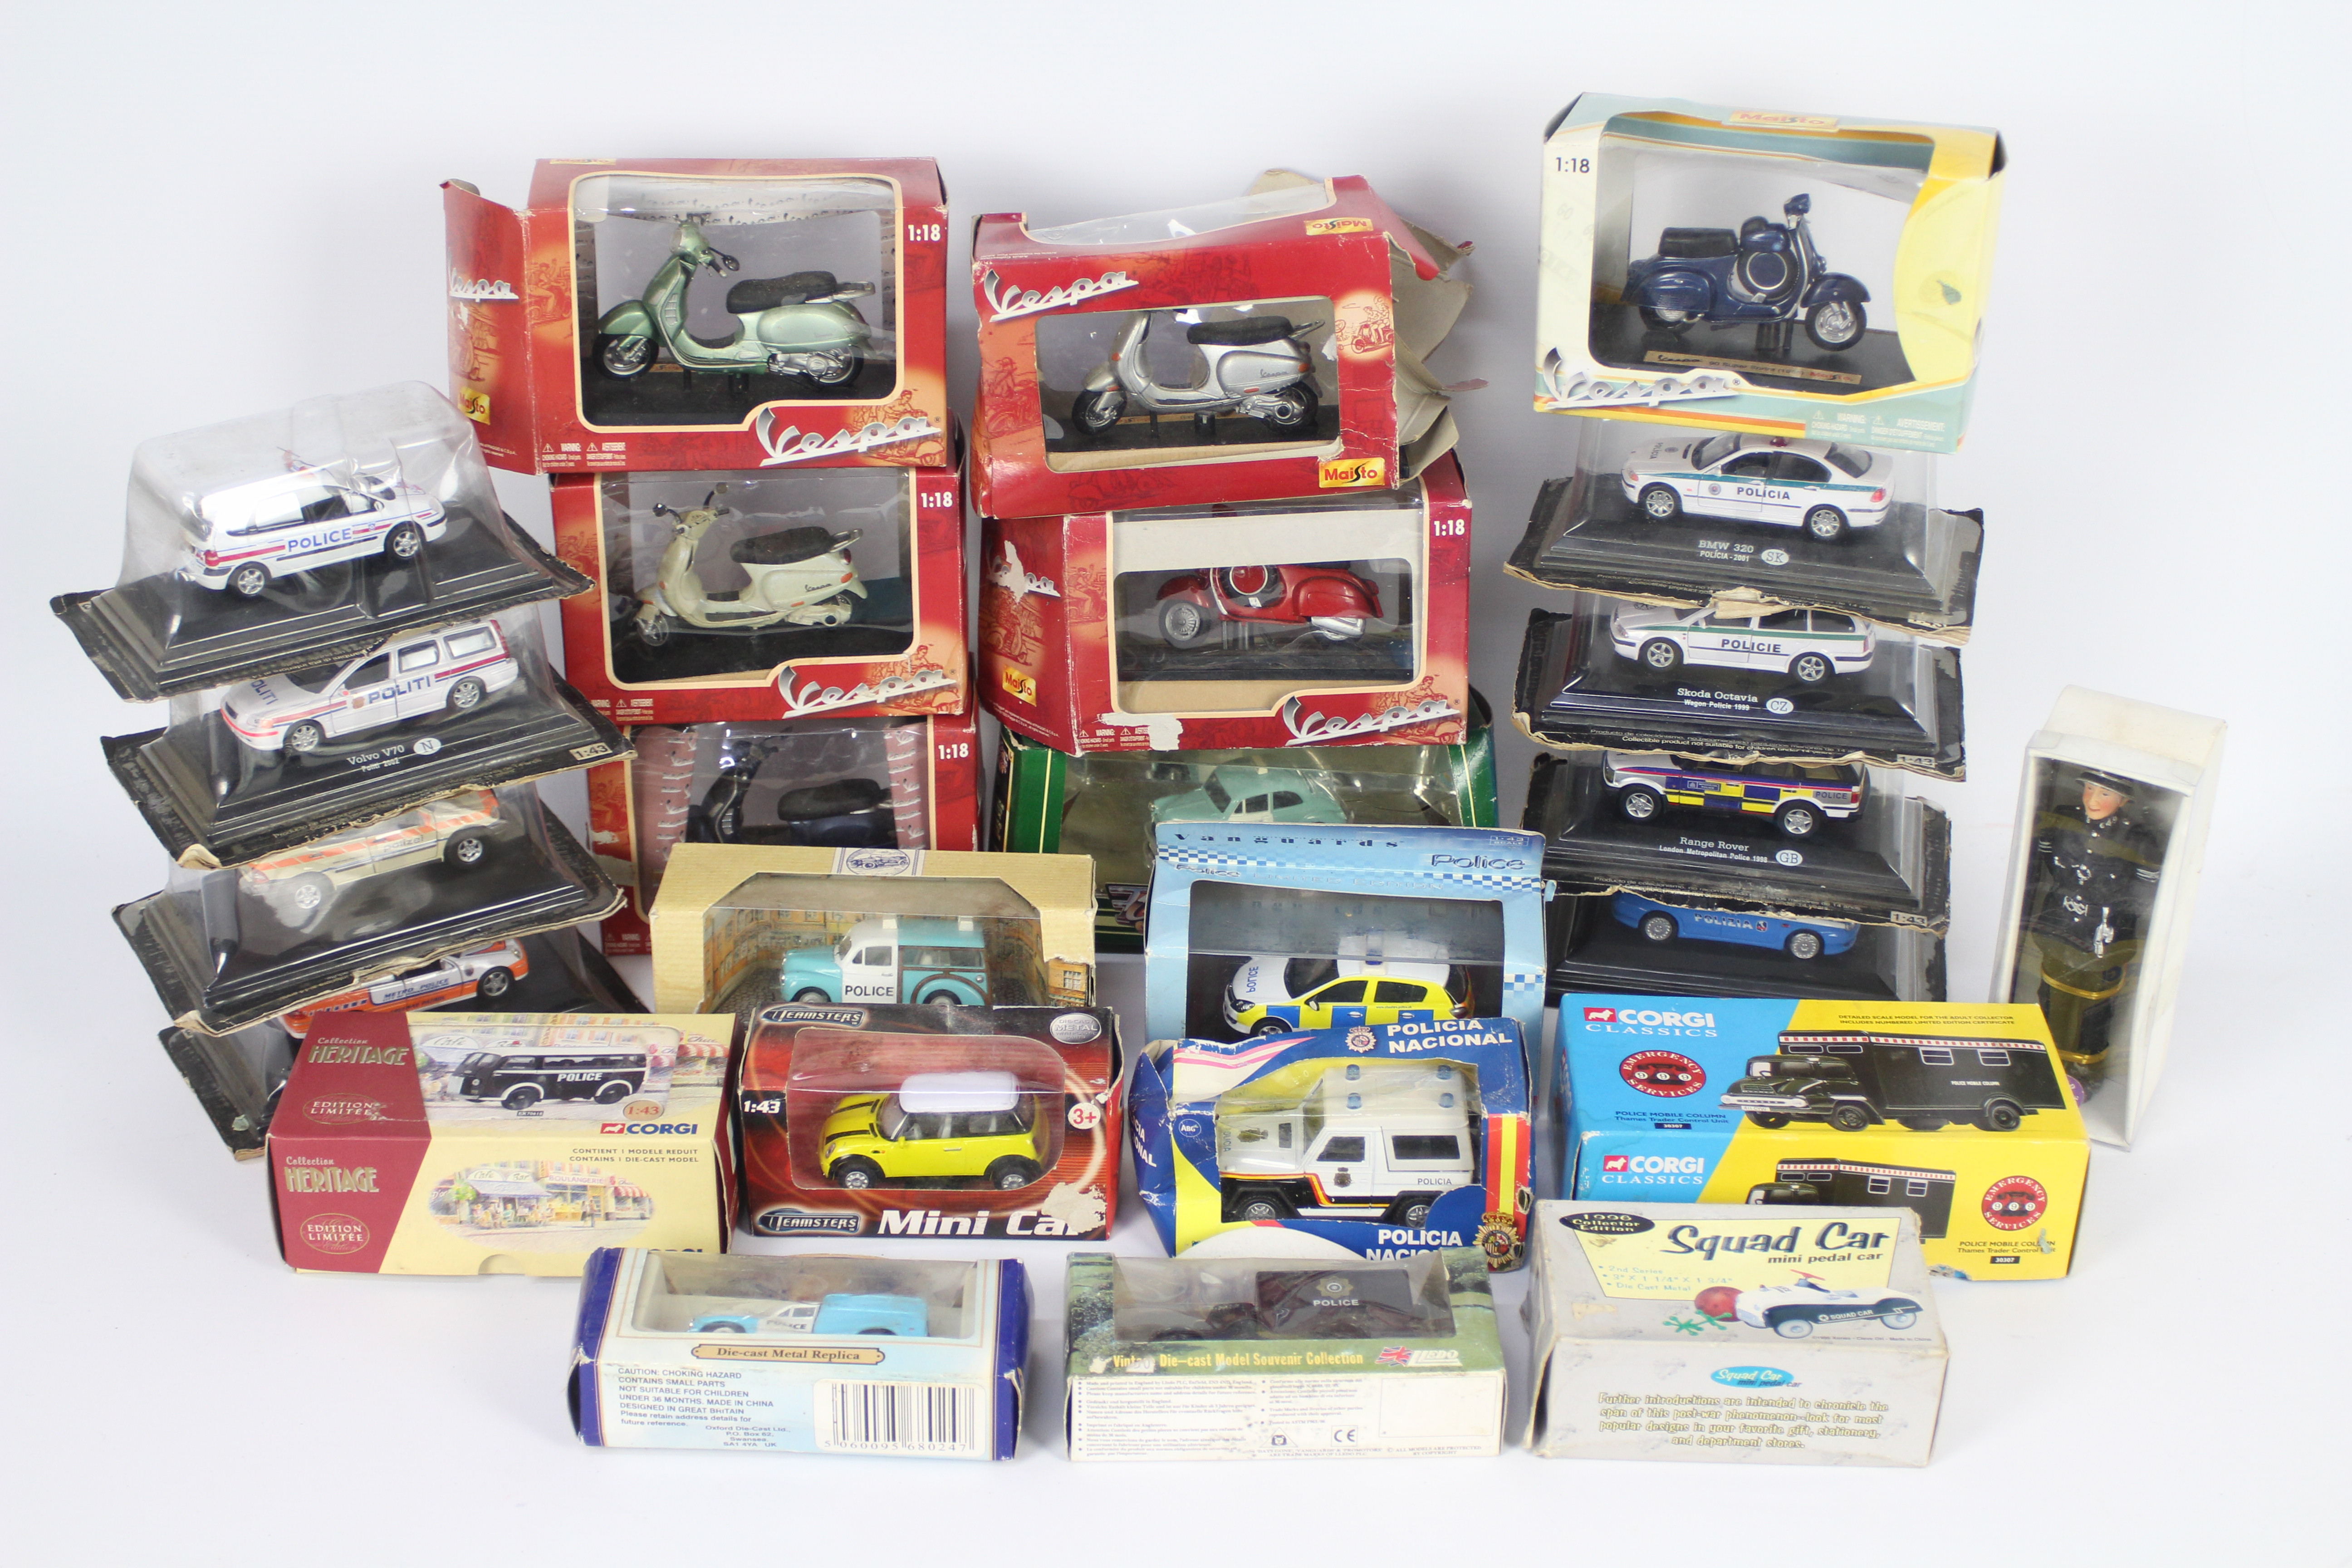 Corgi, Lledo, Maisto, Others - Over 20 boxed diecast mainly police vehicles in various scales.